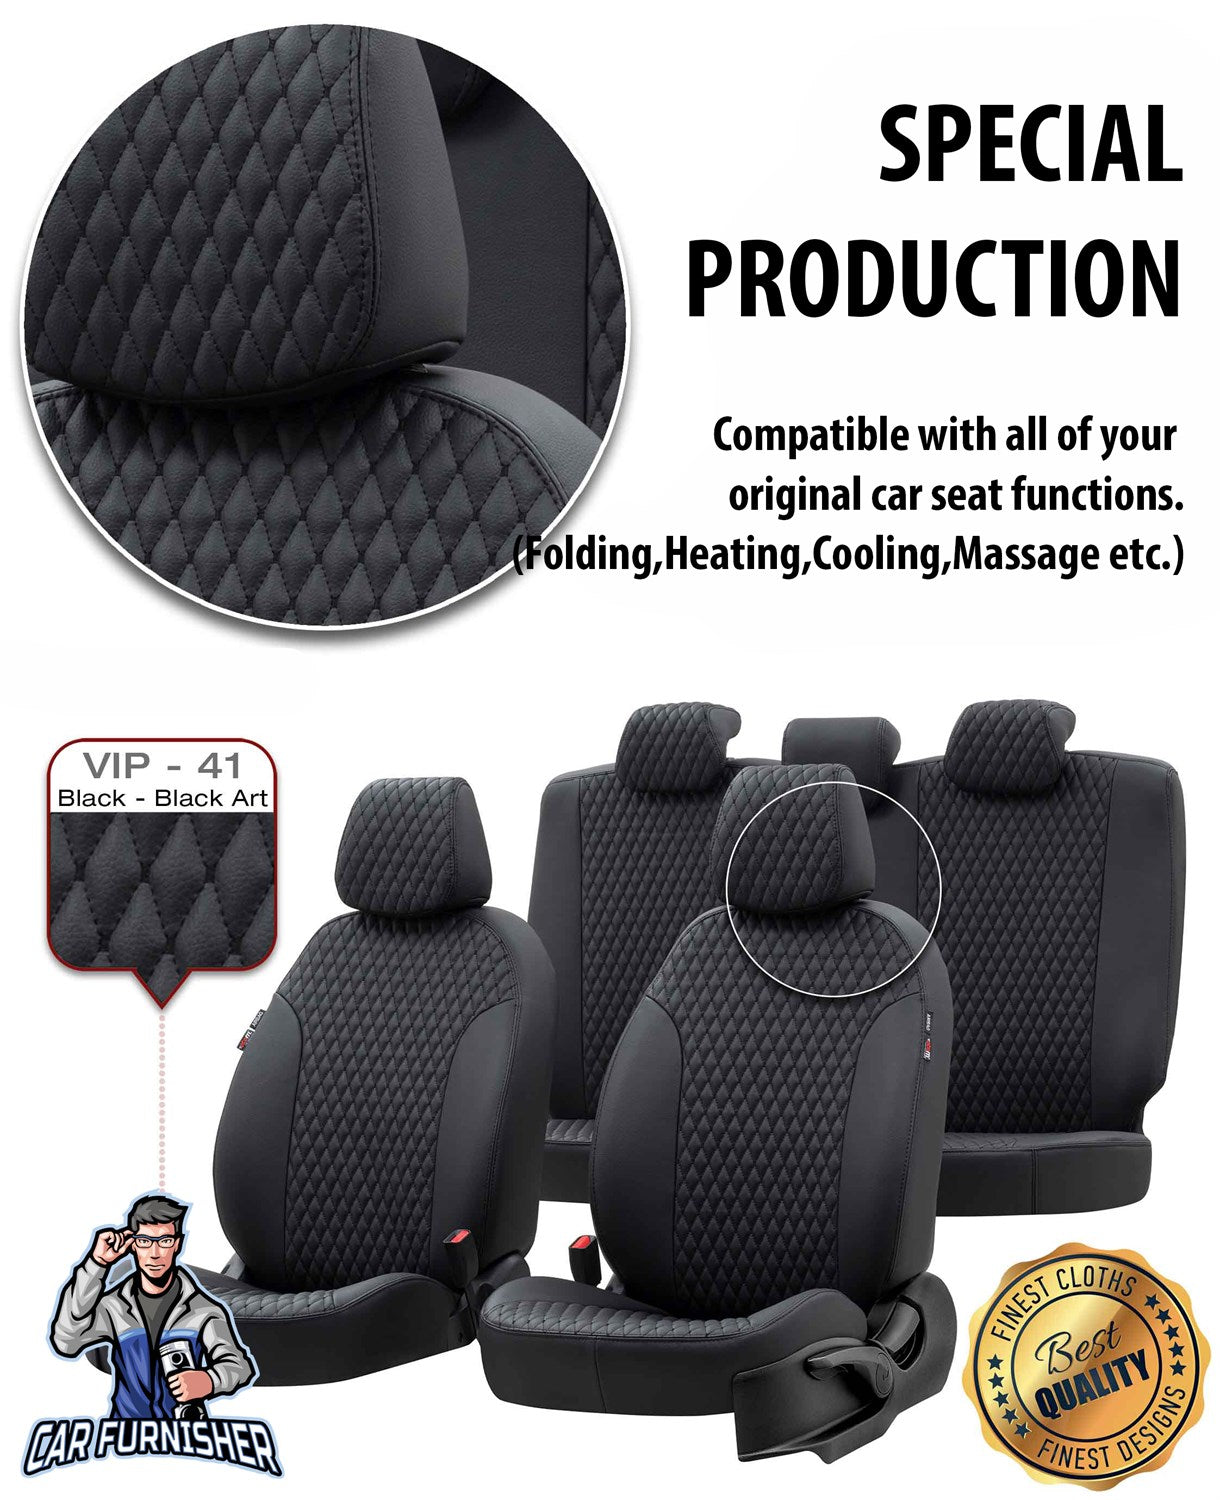 Geely Emgrand Seat Covers Amsterdam Leather Design Ivory Leather